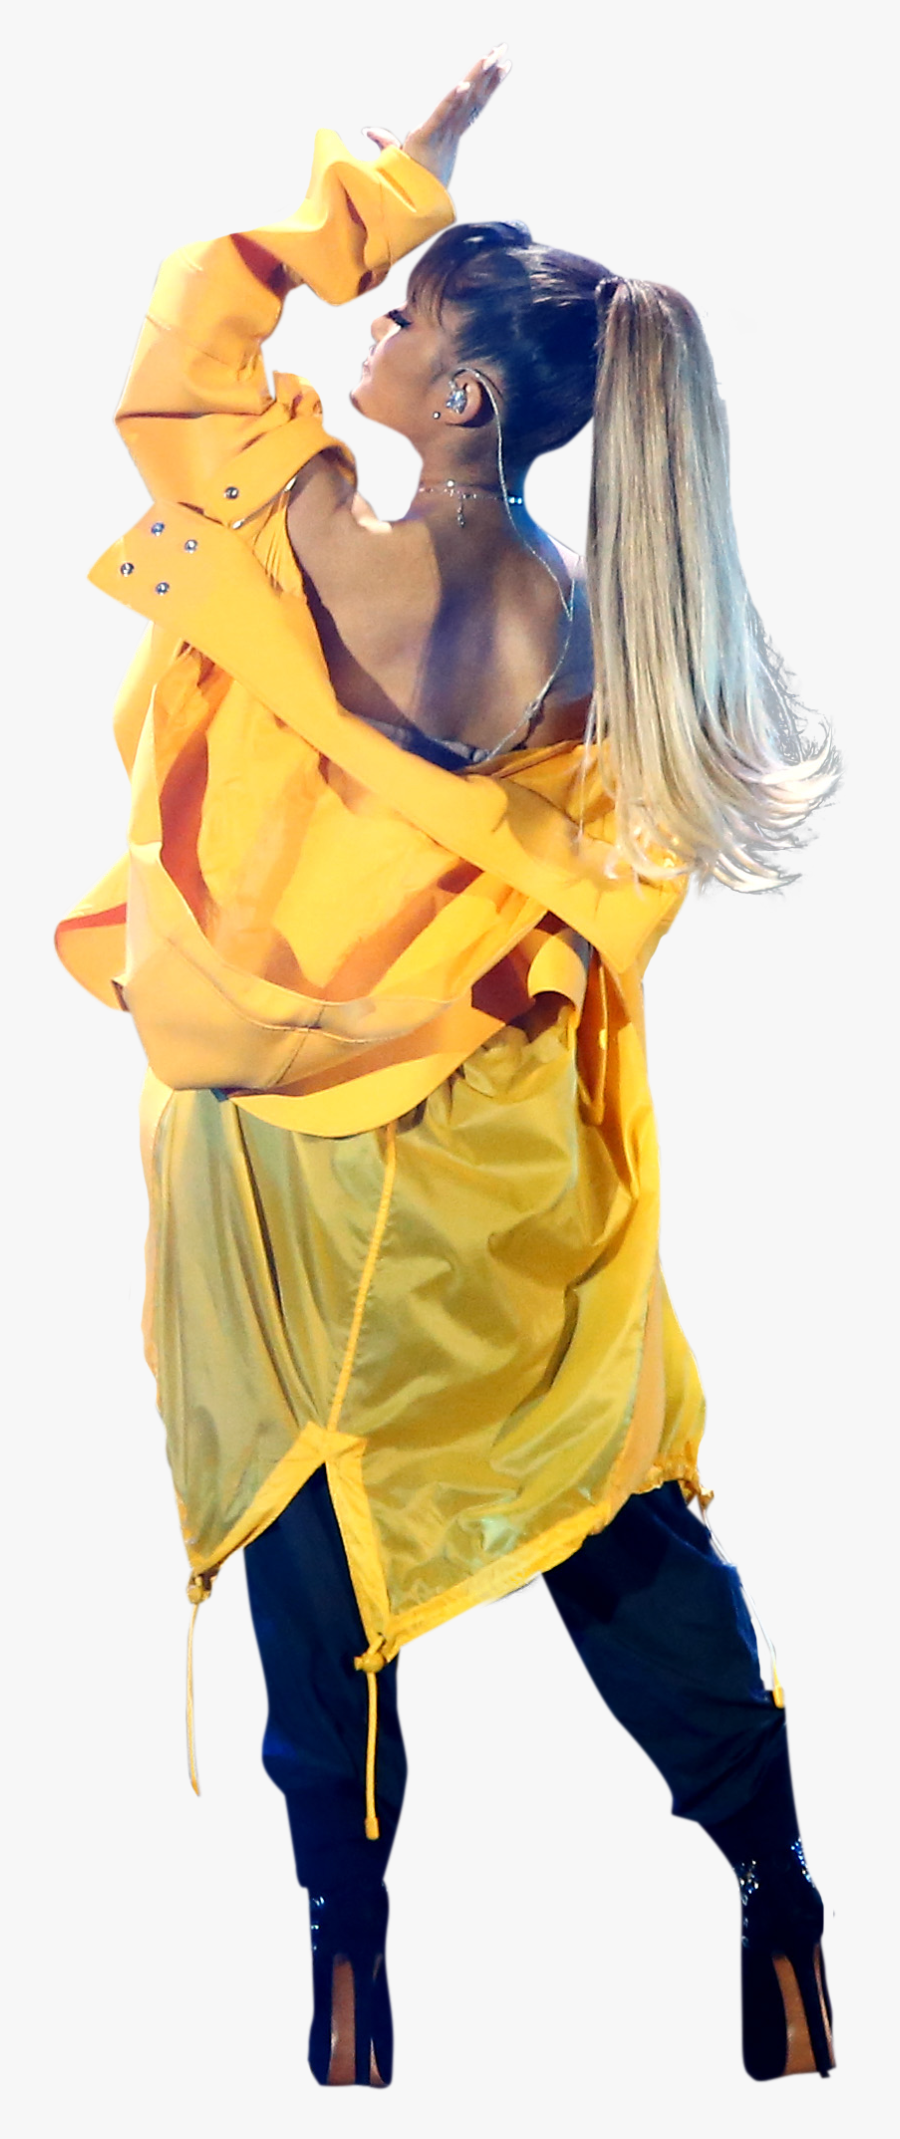 Ariana Grande In Yellow Dress On Stage Png Image - Cosplay, Transparent Clipart